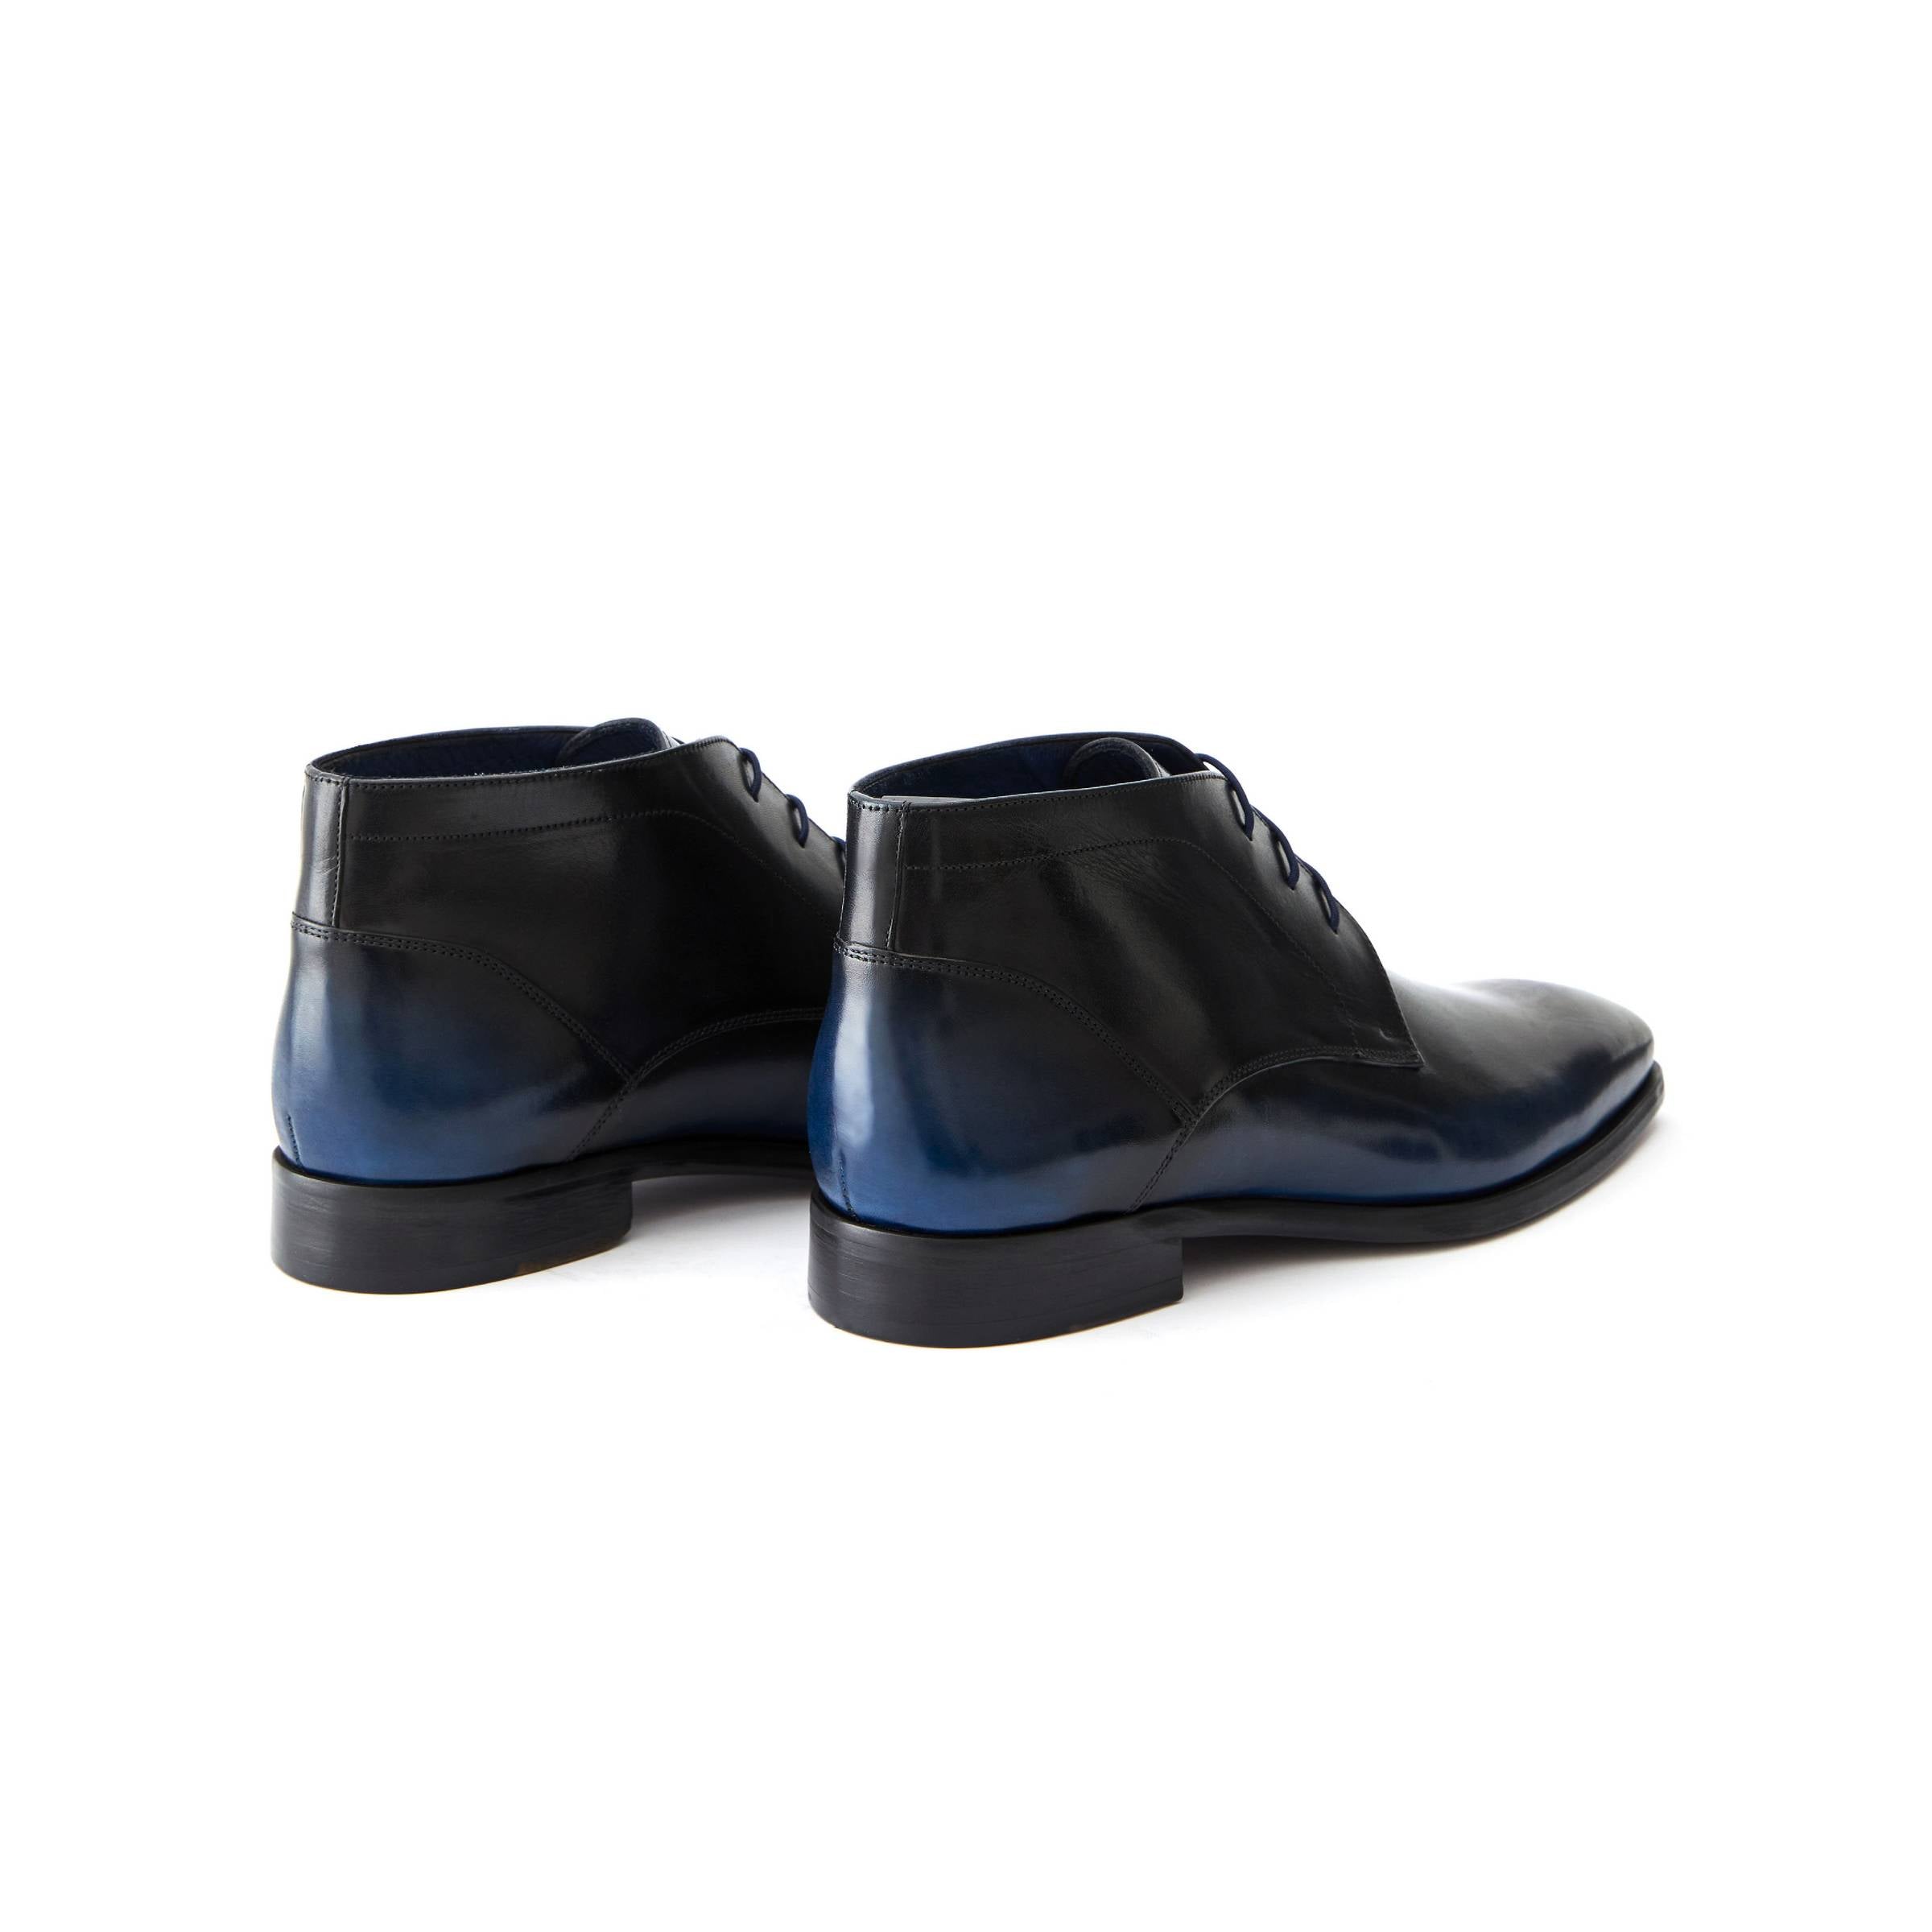 Men's Calf Leather Handmade Derby Boots M10001